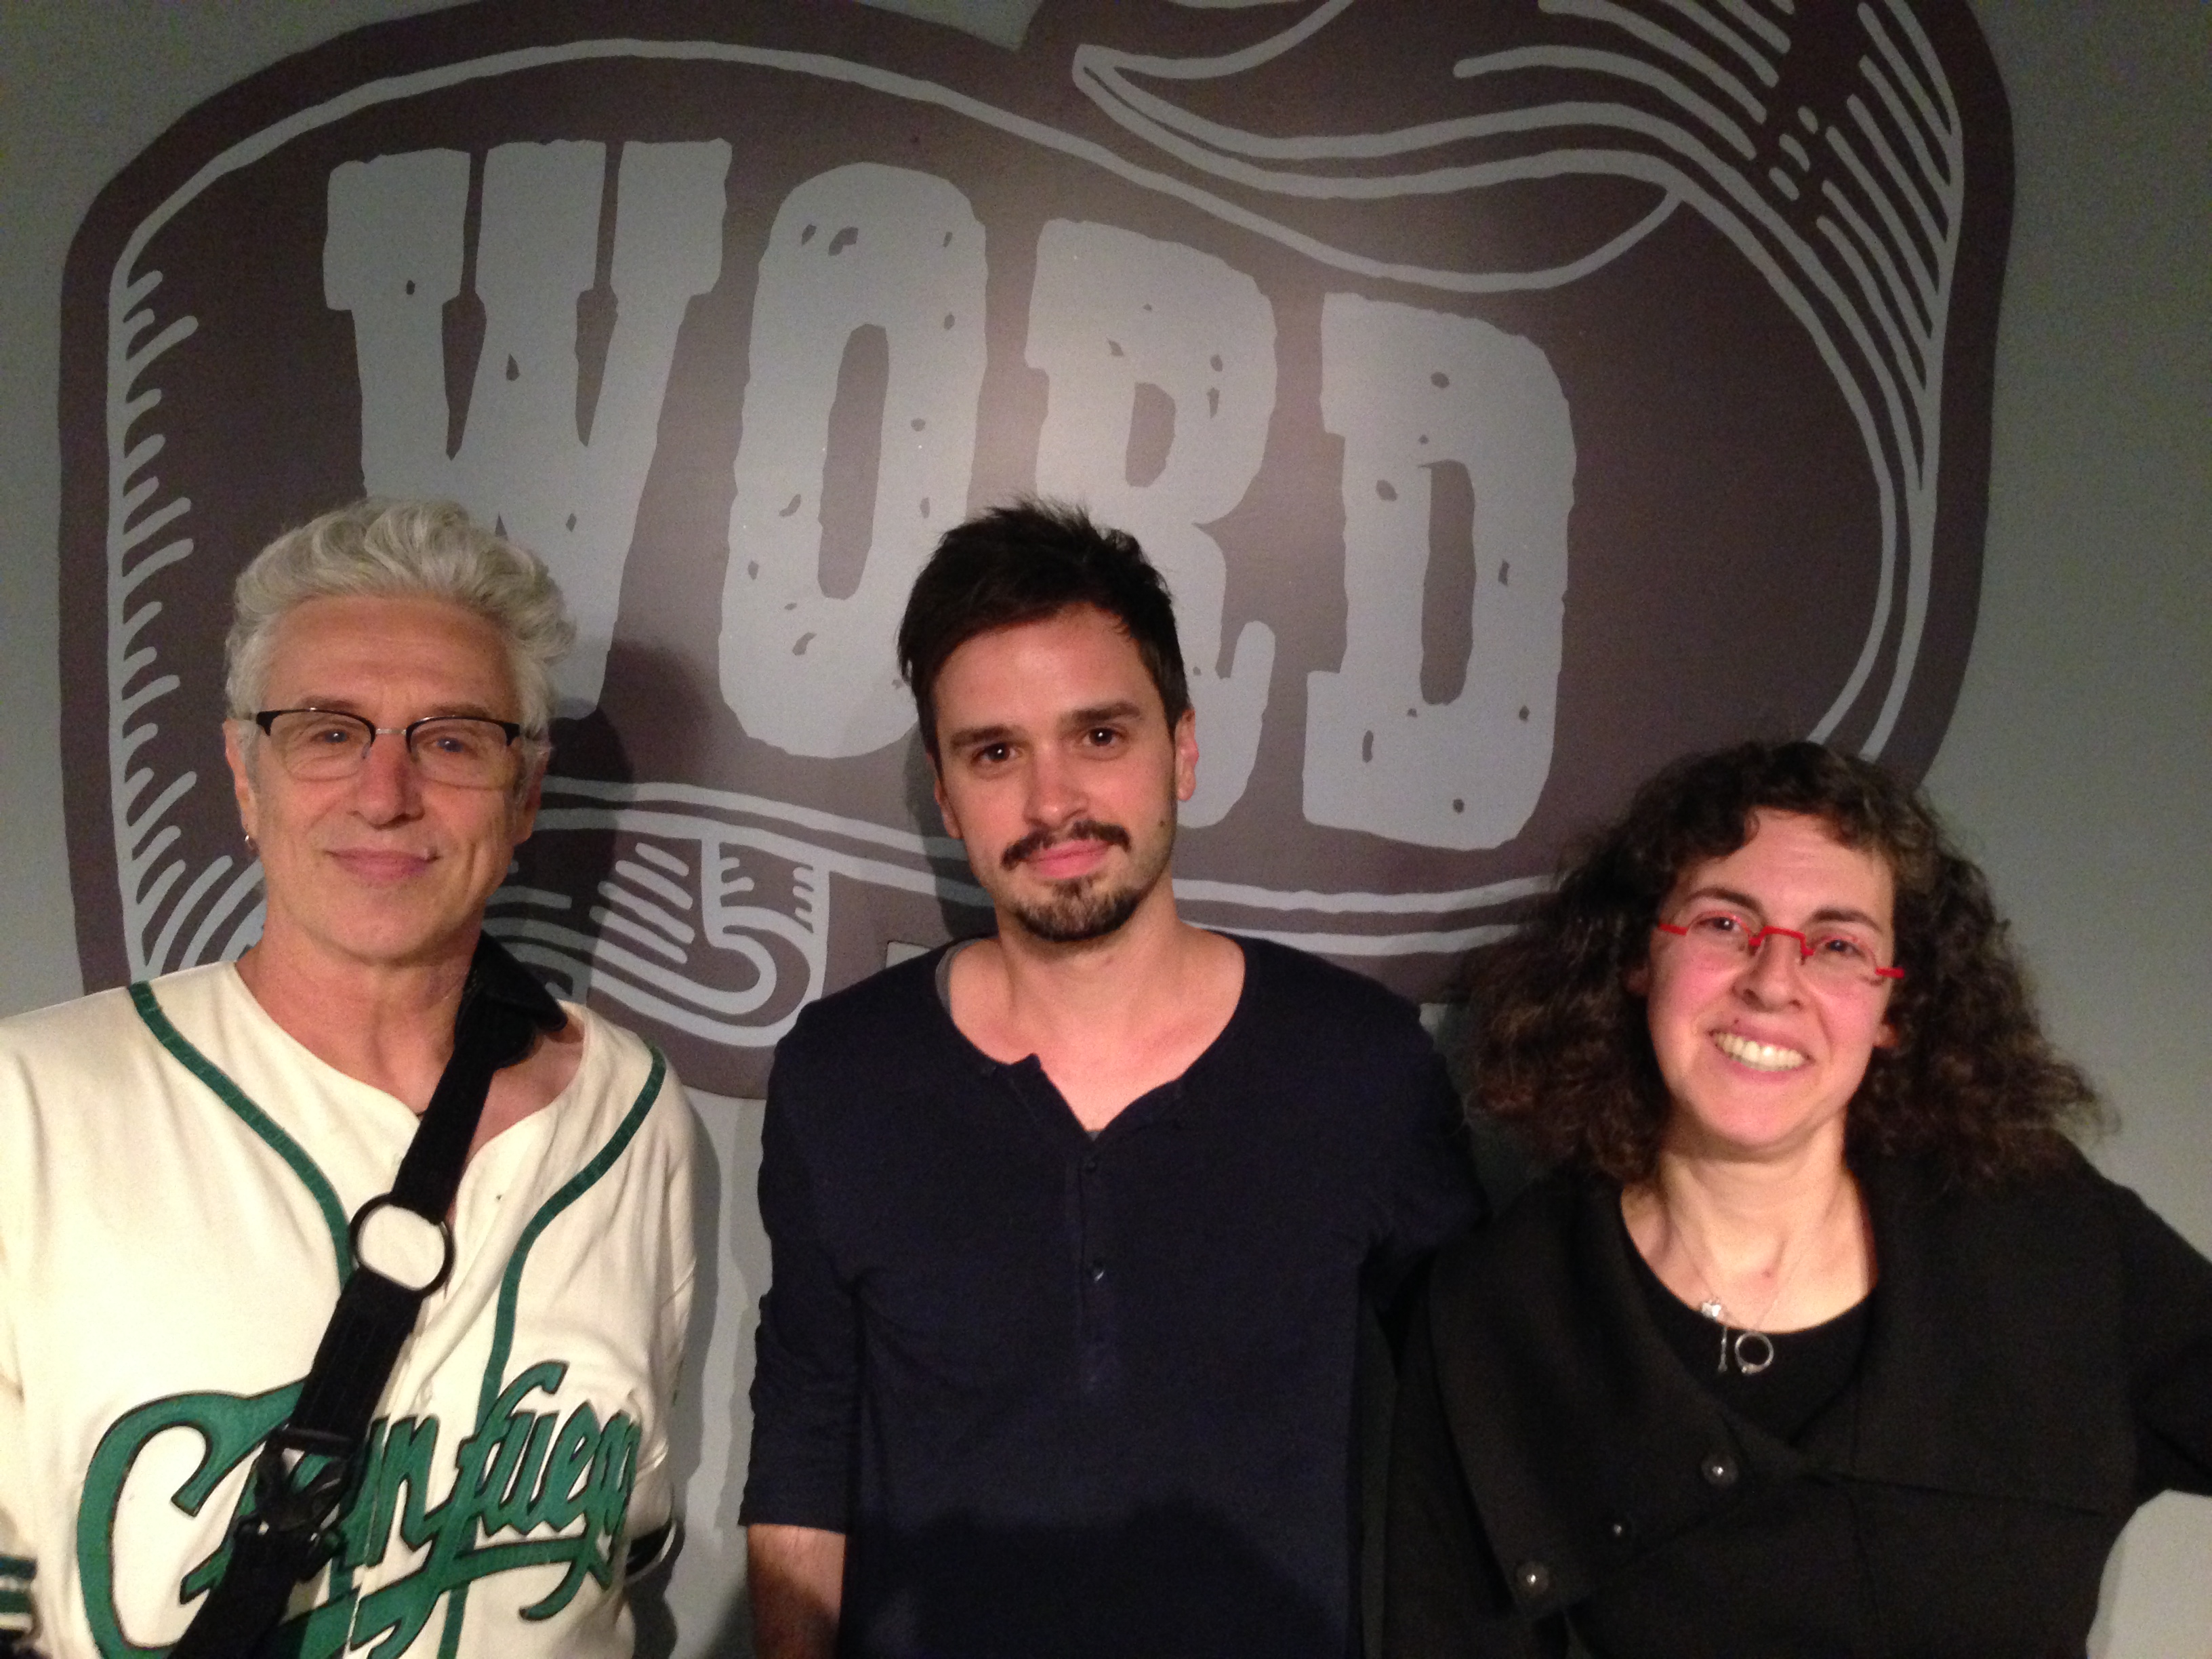 Pitchapalooza winner Val Emmich, David Henry Sterry, and Arielle Eckstut at Word Bookstore